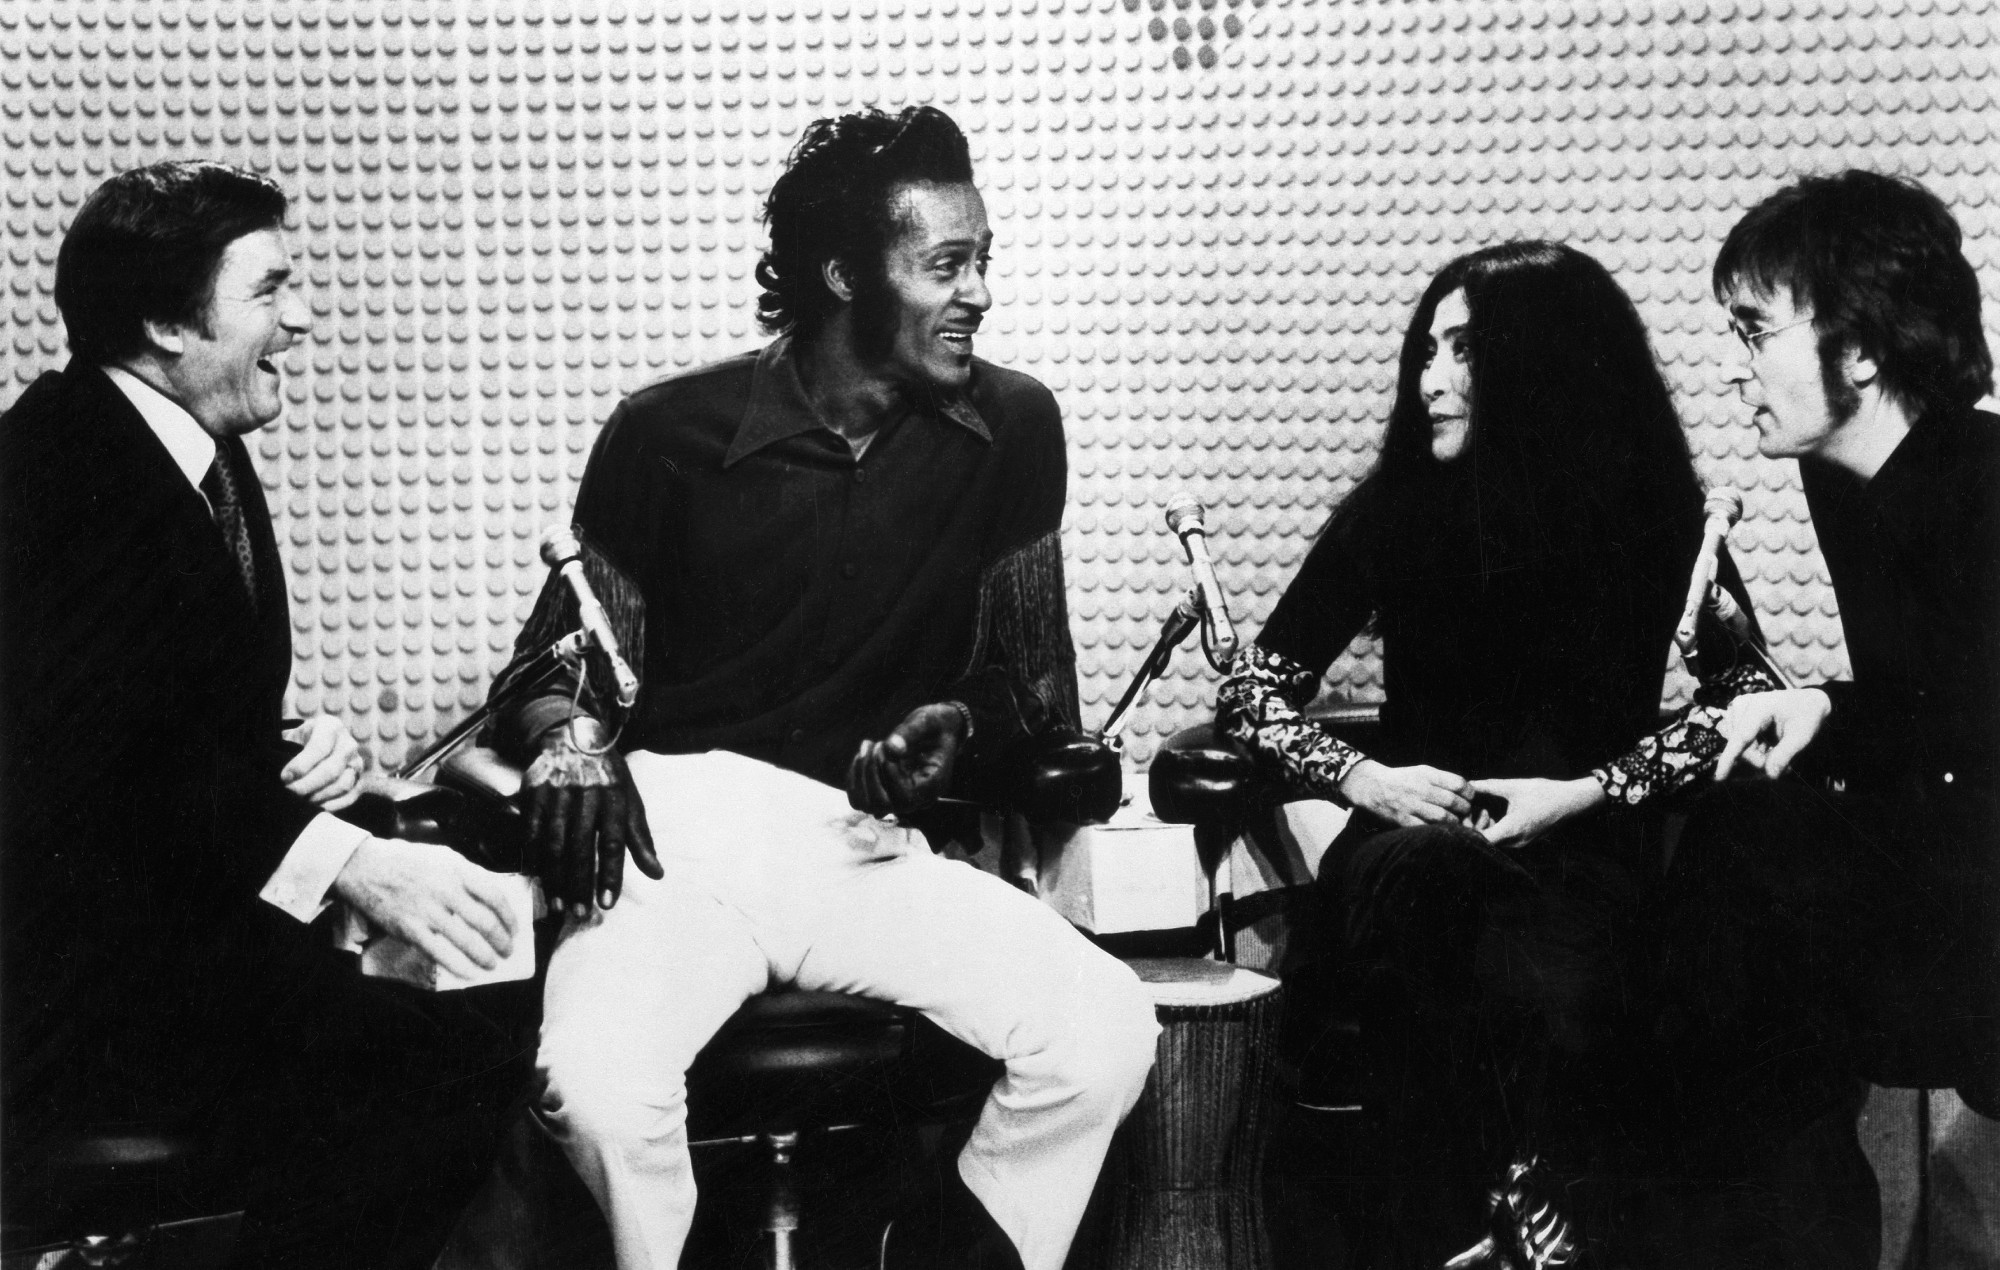 New documentary to revisit the week John Lennon and Yoko Ono co-hosted ‘The Mike Douglas Show’